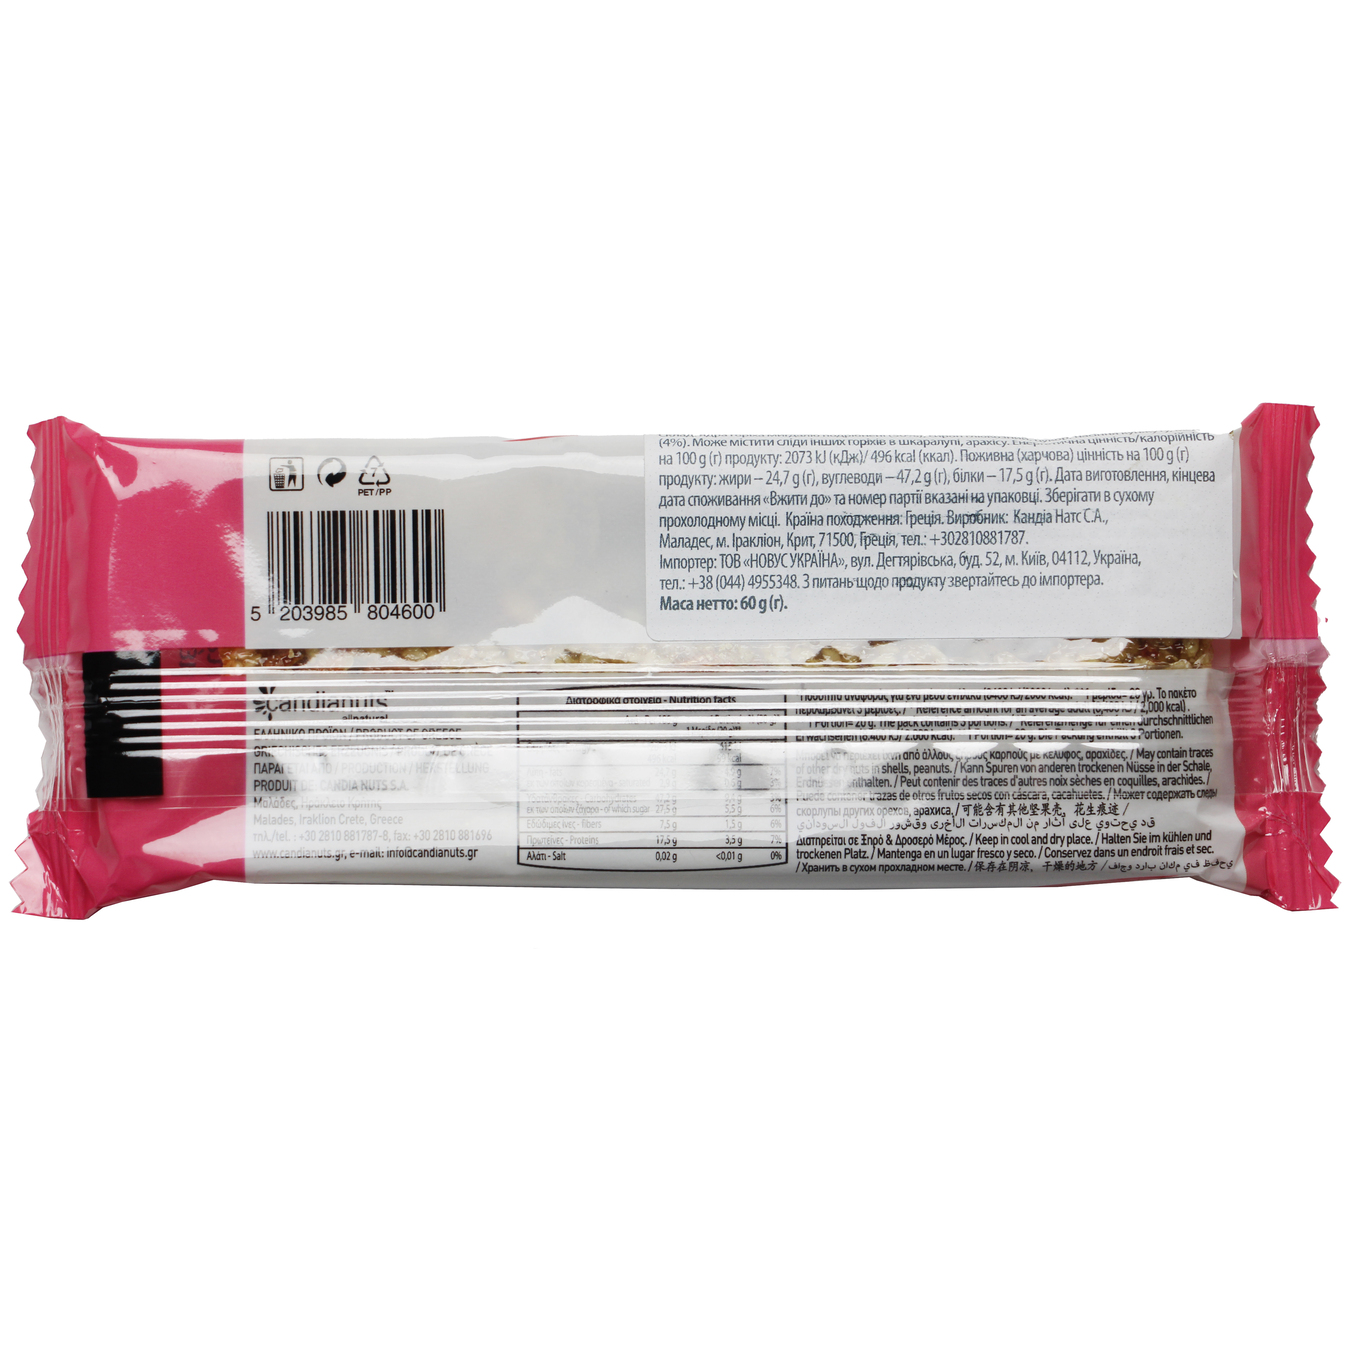 Minos With Almond And Honey Nut Bar 60g 2